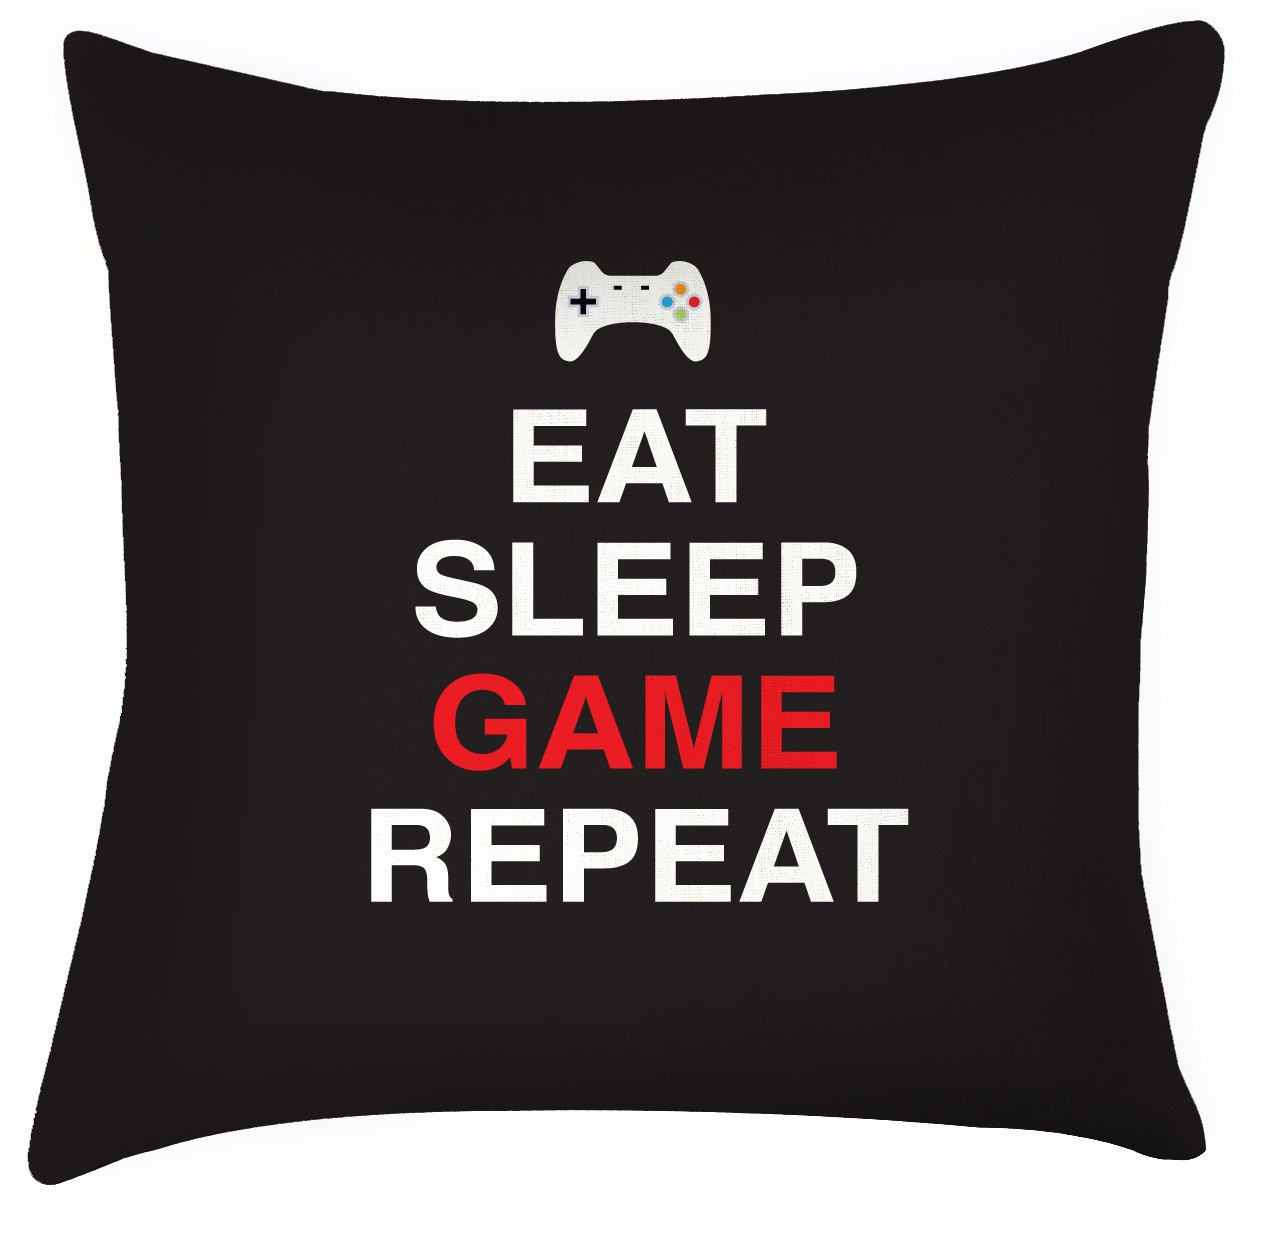 Top Fathers Day Gifts 2020
 Eat Sleep Game repeat cushion great fathers day t